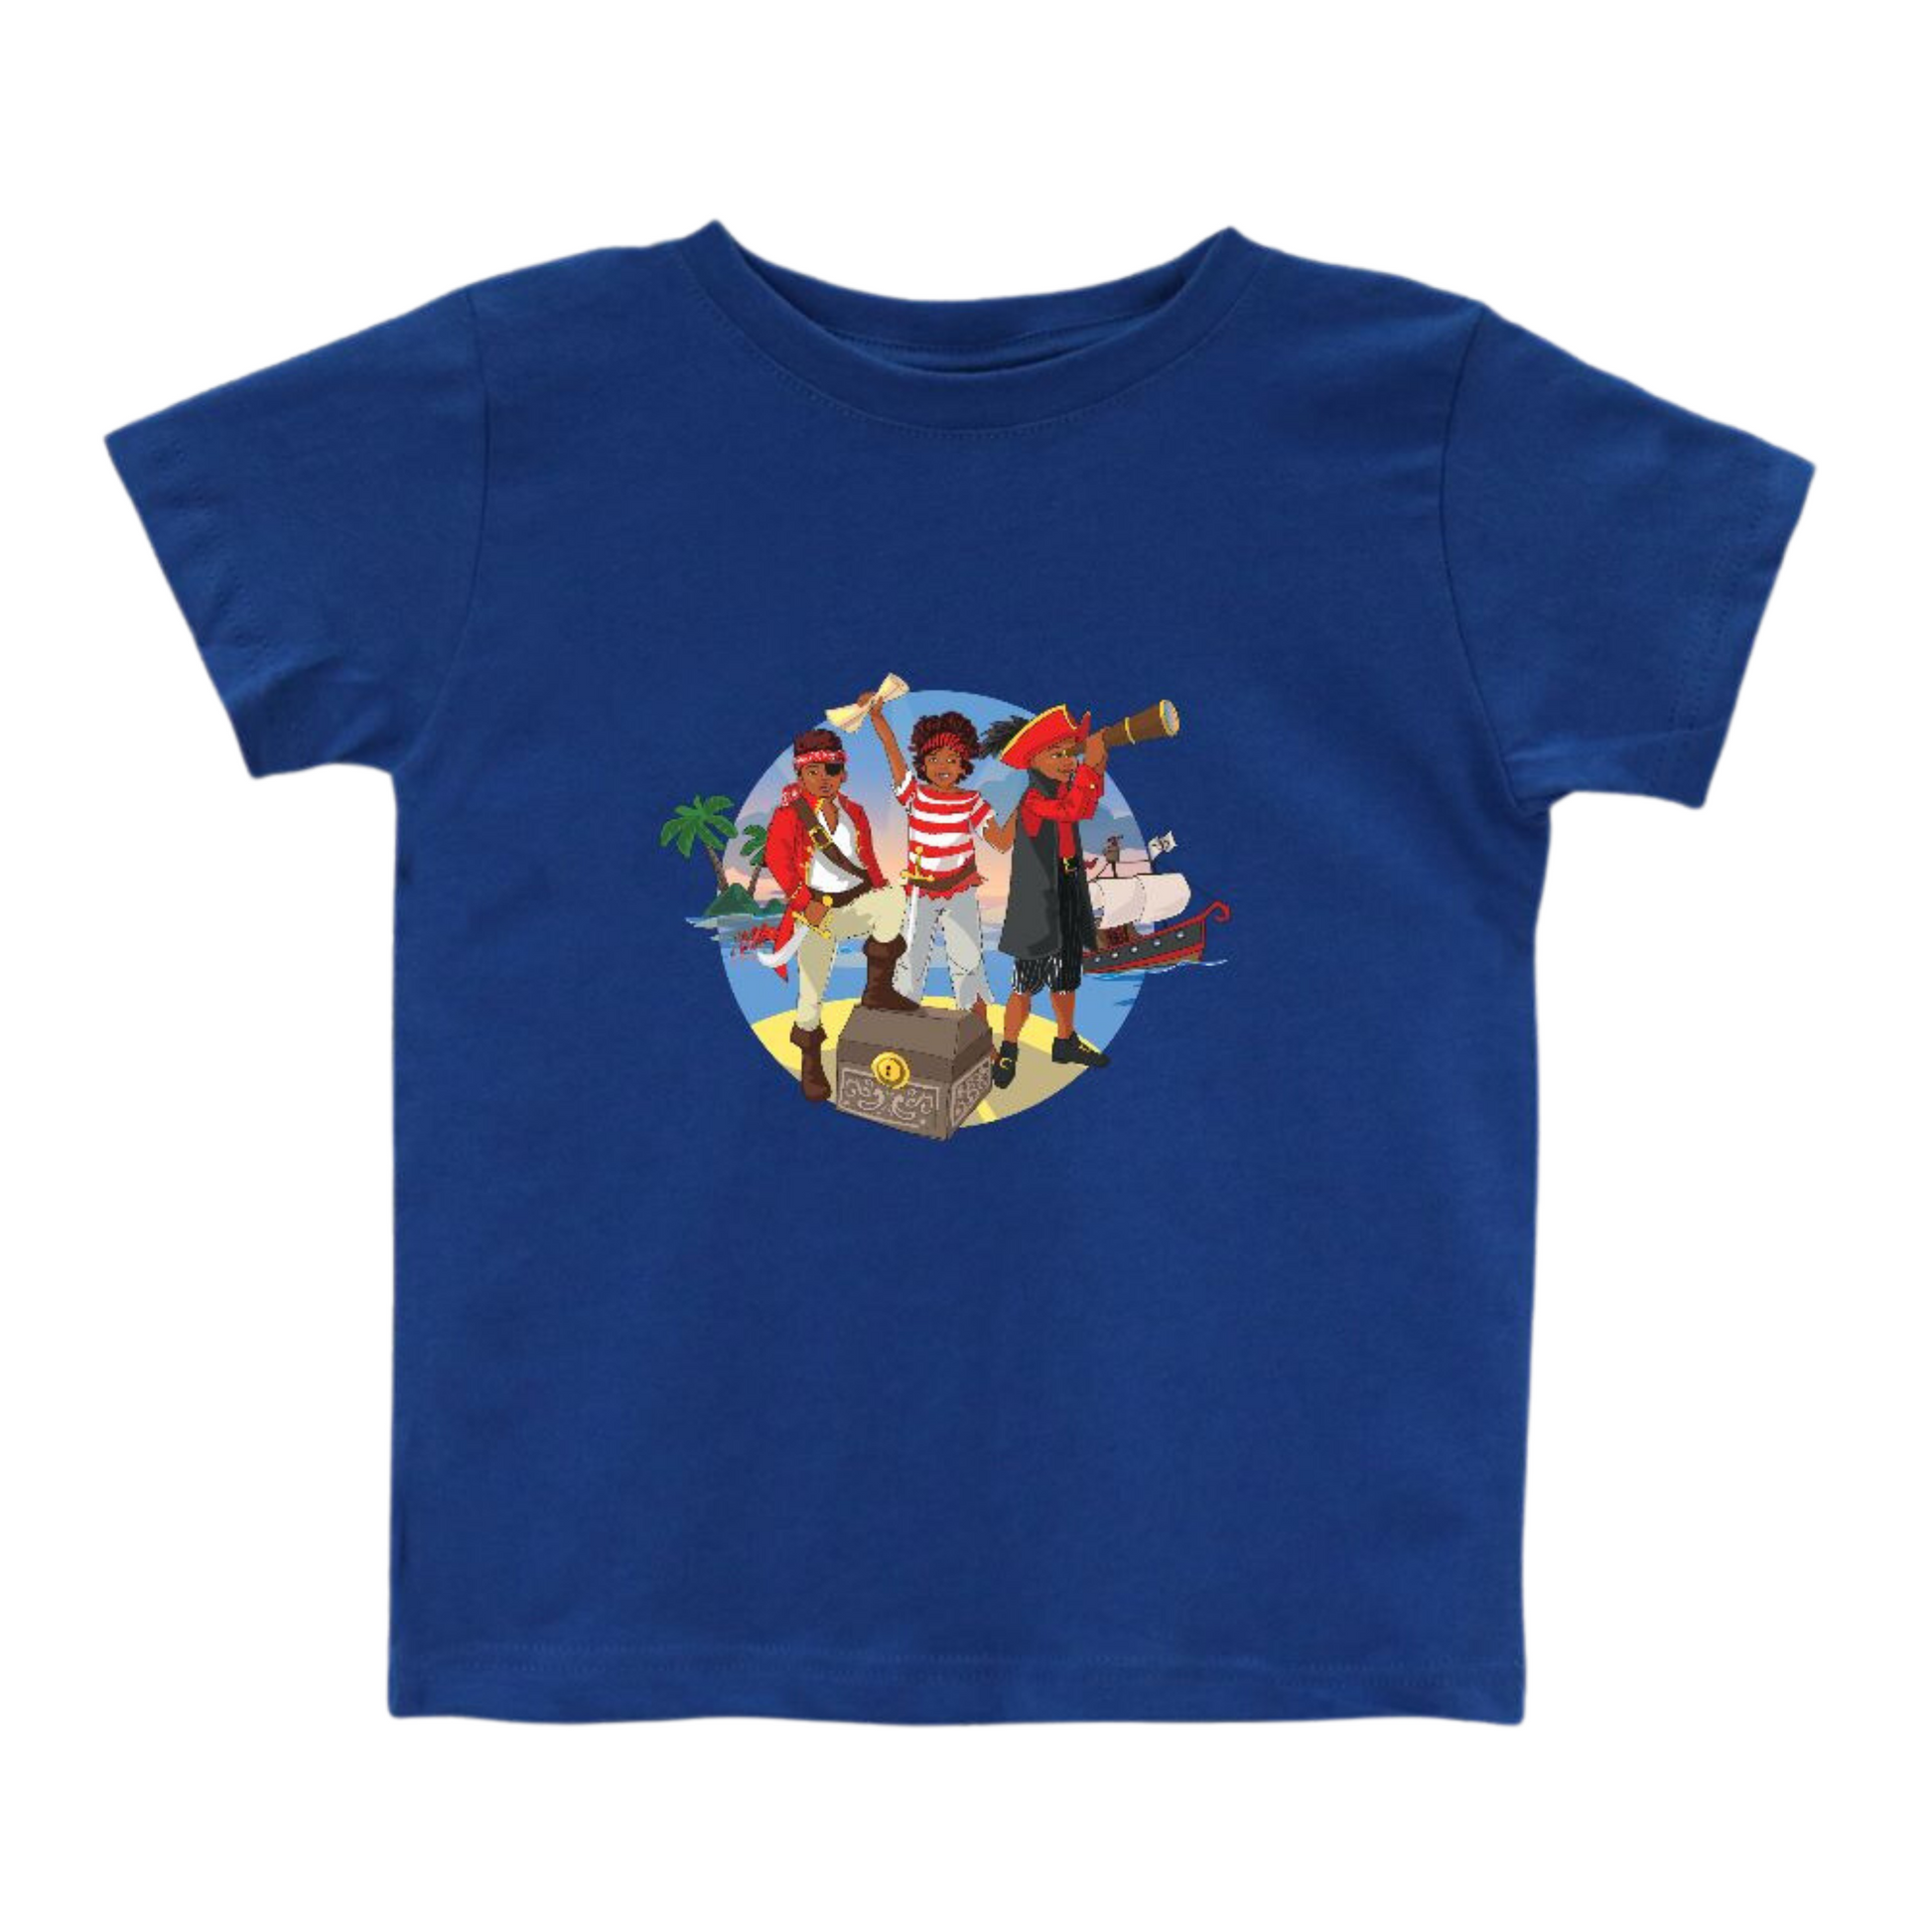 Pirate Friends Shirt for Toddlers